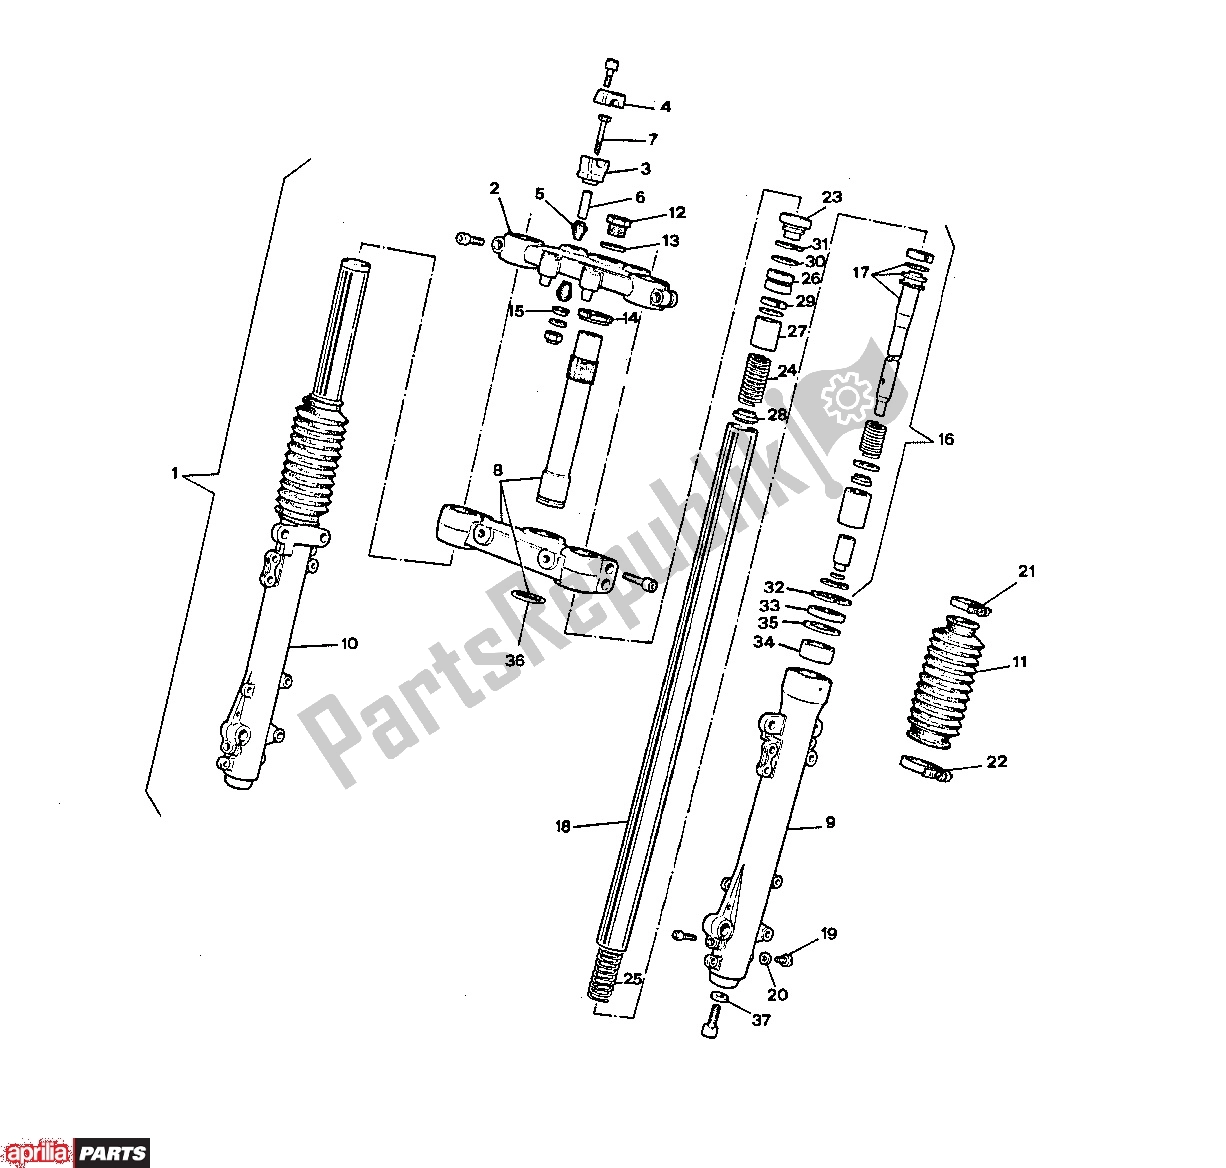 All parts for the Front Fork Ii of the Aprilia Tuareg Wind 252 350 1986 - 1988